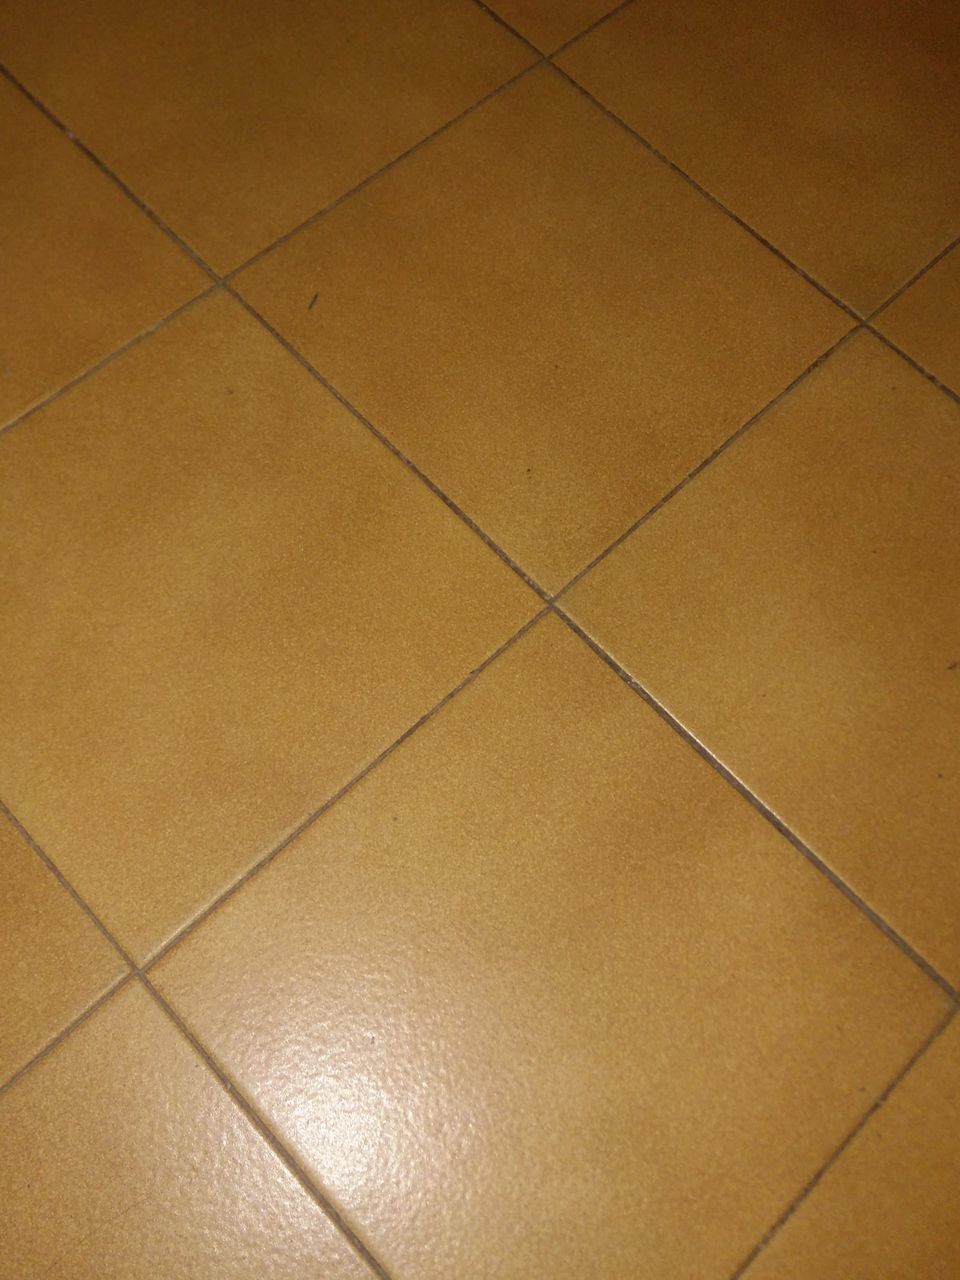 CLOSE-UP OF TILED FLOOR